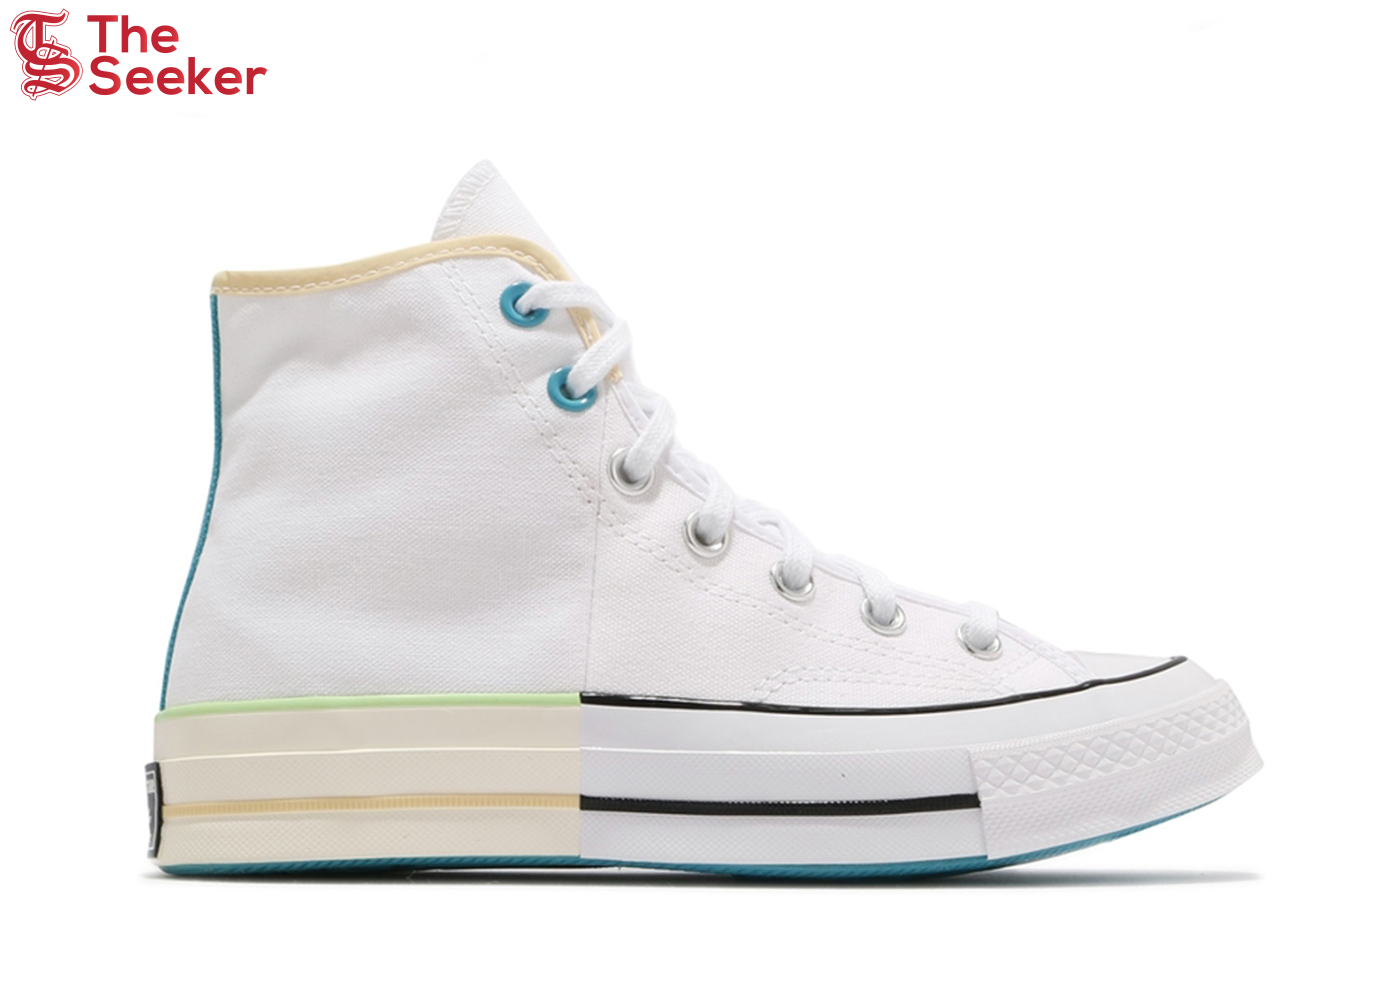 Converse Chuck Taylor All Star 70 Hi White Pack Chambray Blue